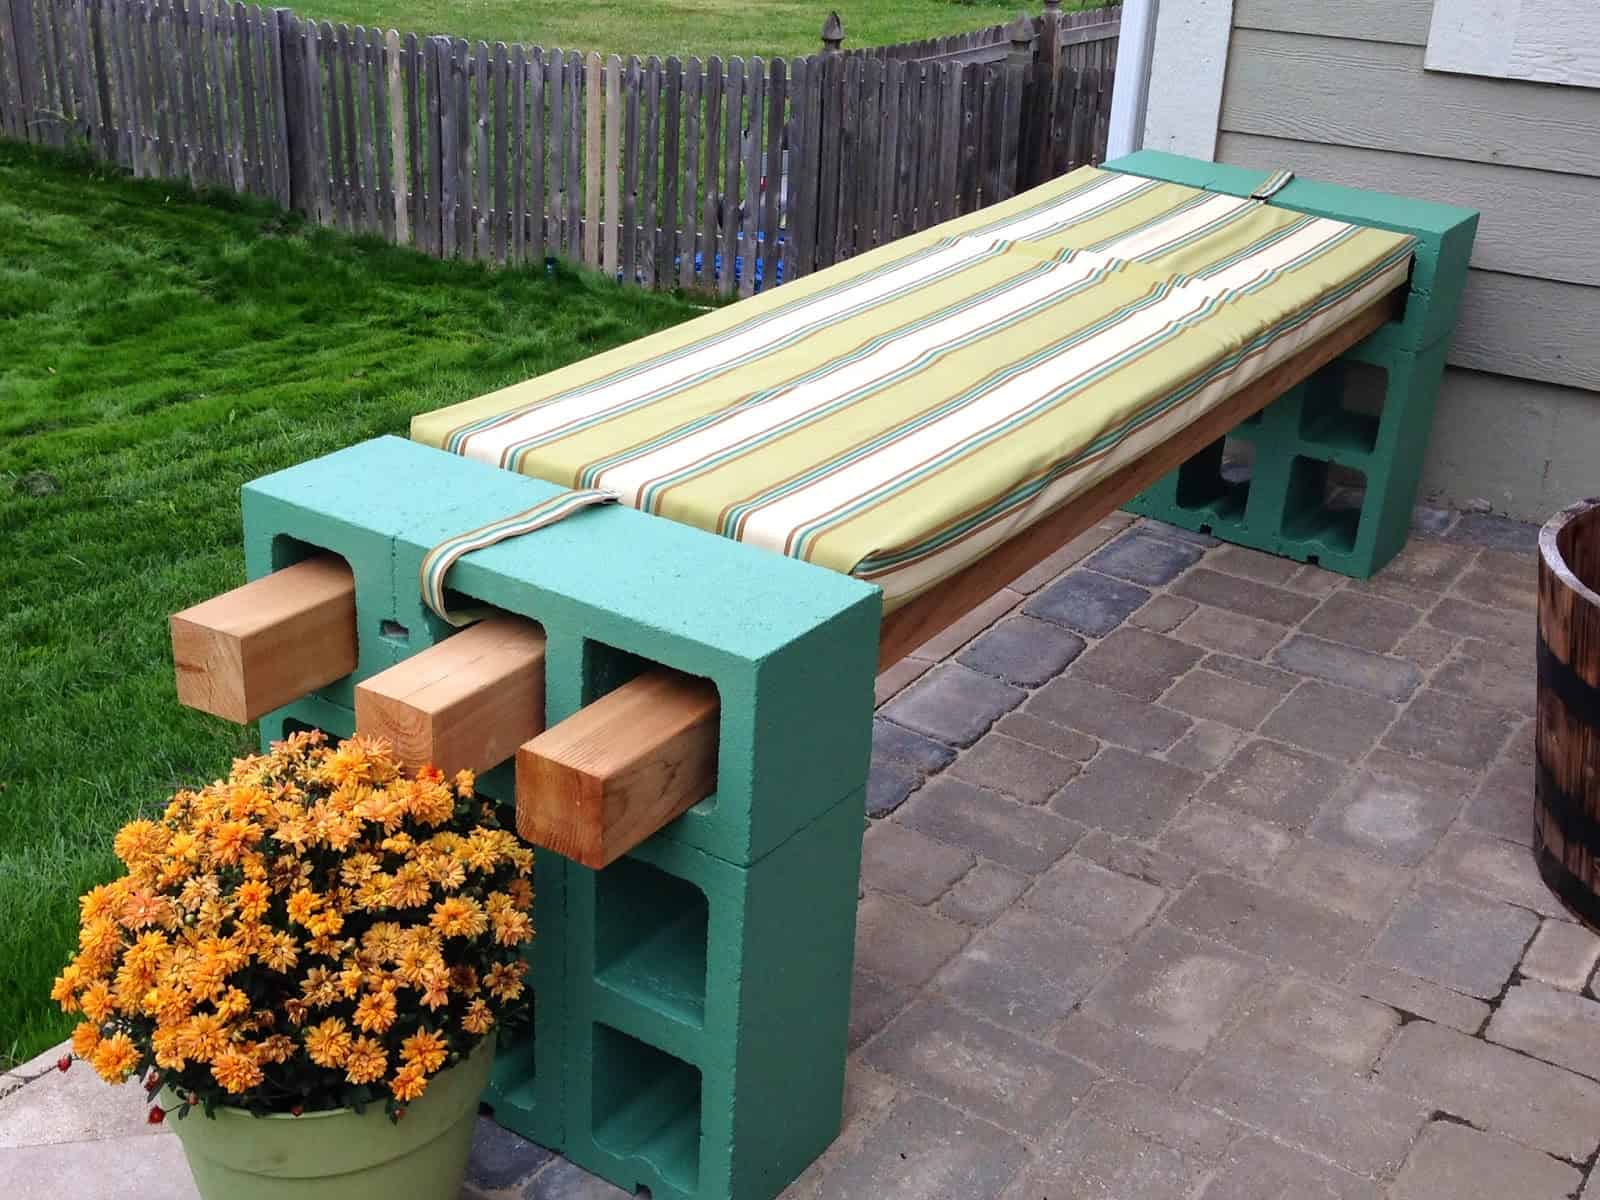 green lowes cinder blocks outdoor bench with cushion seat for outdoor decoration ideas lowes cinder block cinder color cost of cinder blocks decorative concrete blocks home depot lowes flagstone